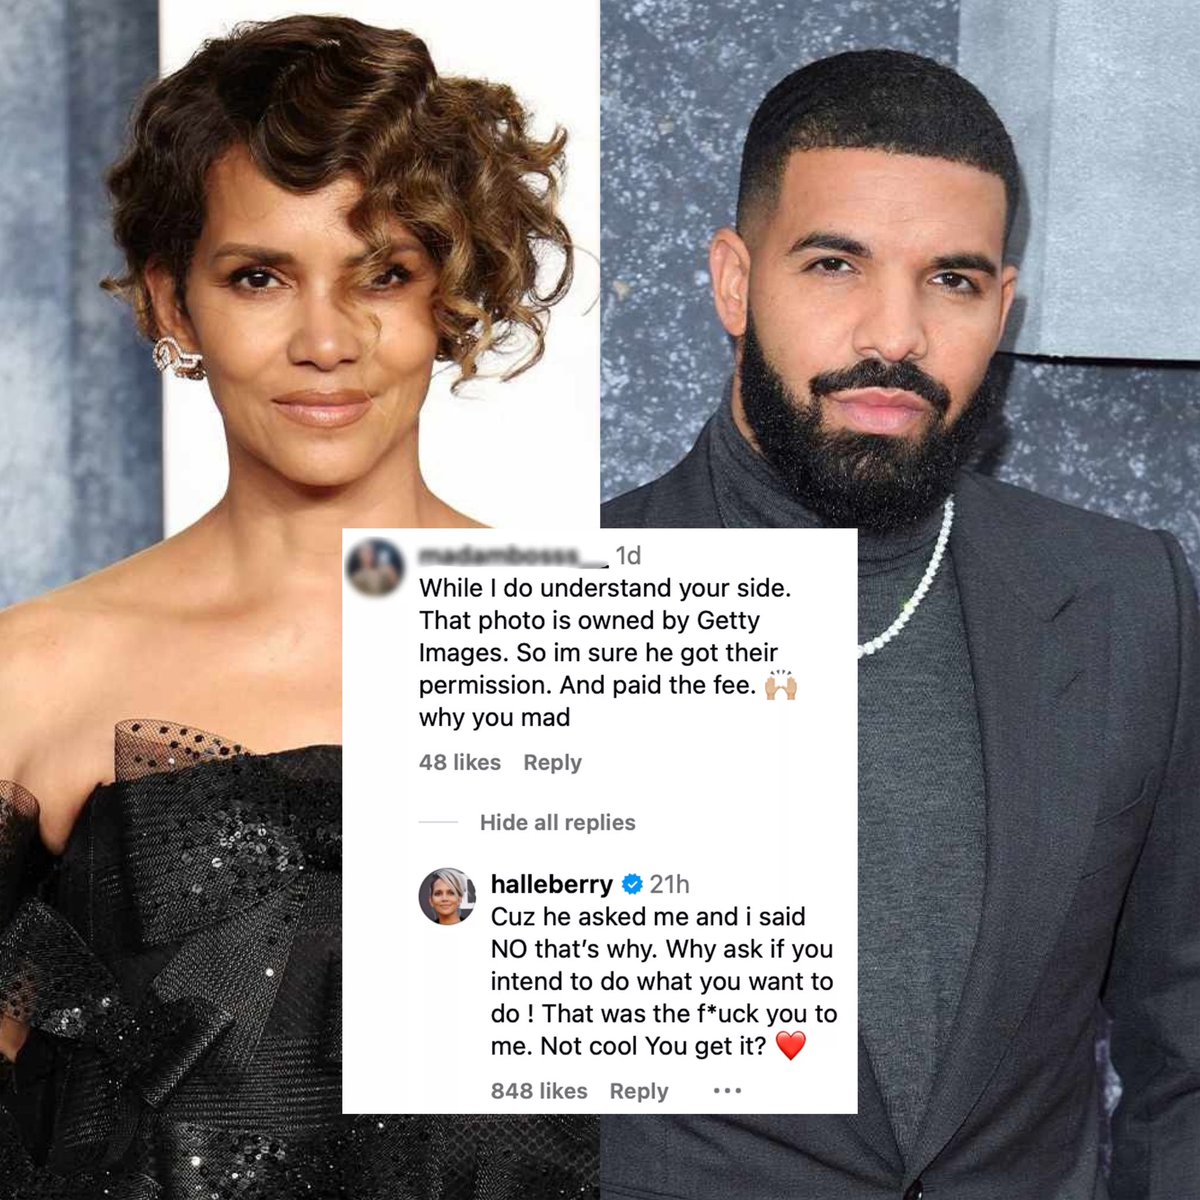 Halle Berry says Drake reached out to ask her if he could use the photo of her covered in slime for his new single, and still used it despite her saying no: “He asked me and i said NO… Why ask if you intend to do what you want to do ! That was the f*uck you to me. Not cool You…